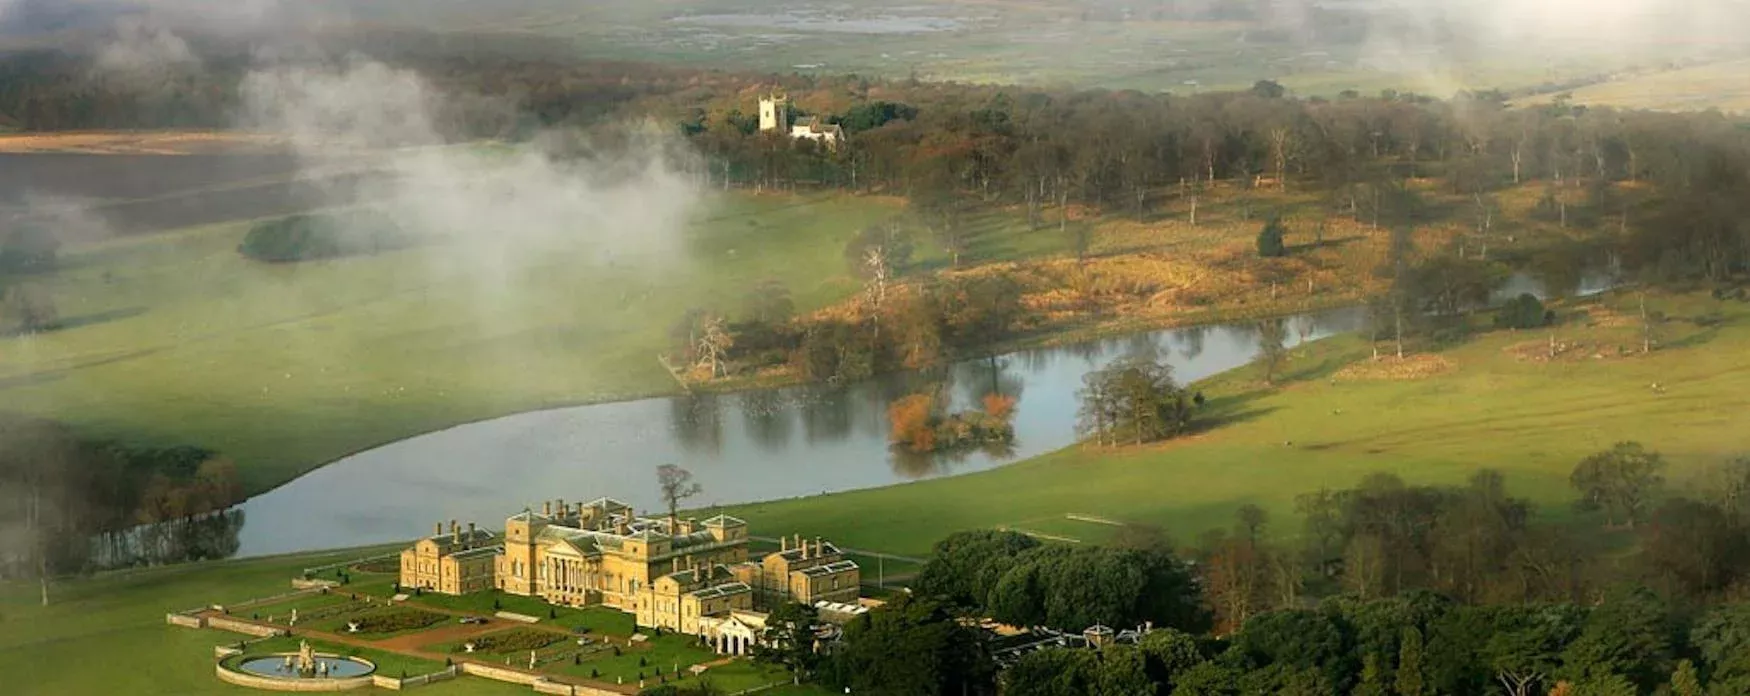 Holkham Hall from above